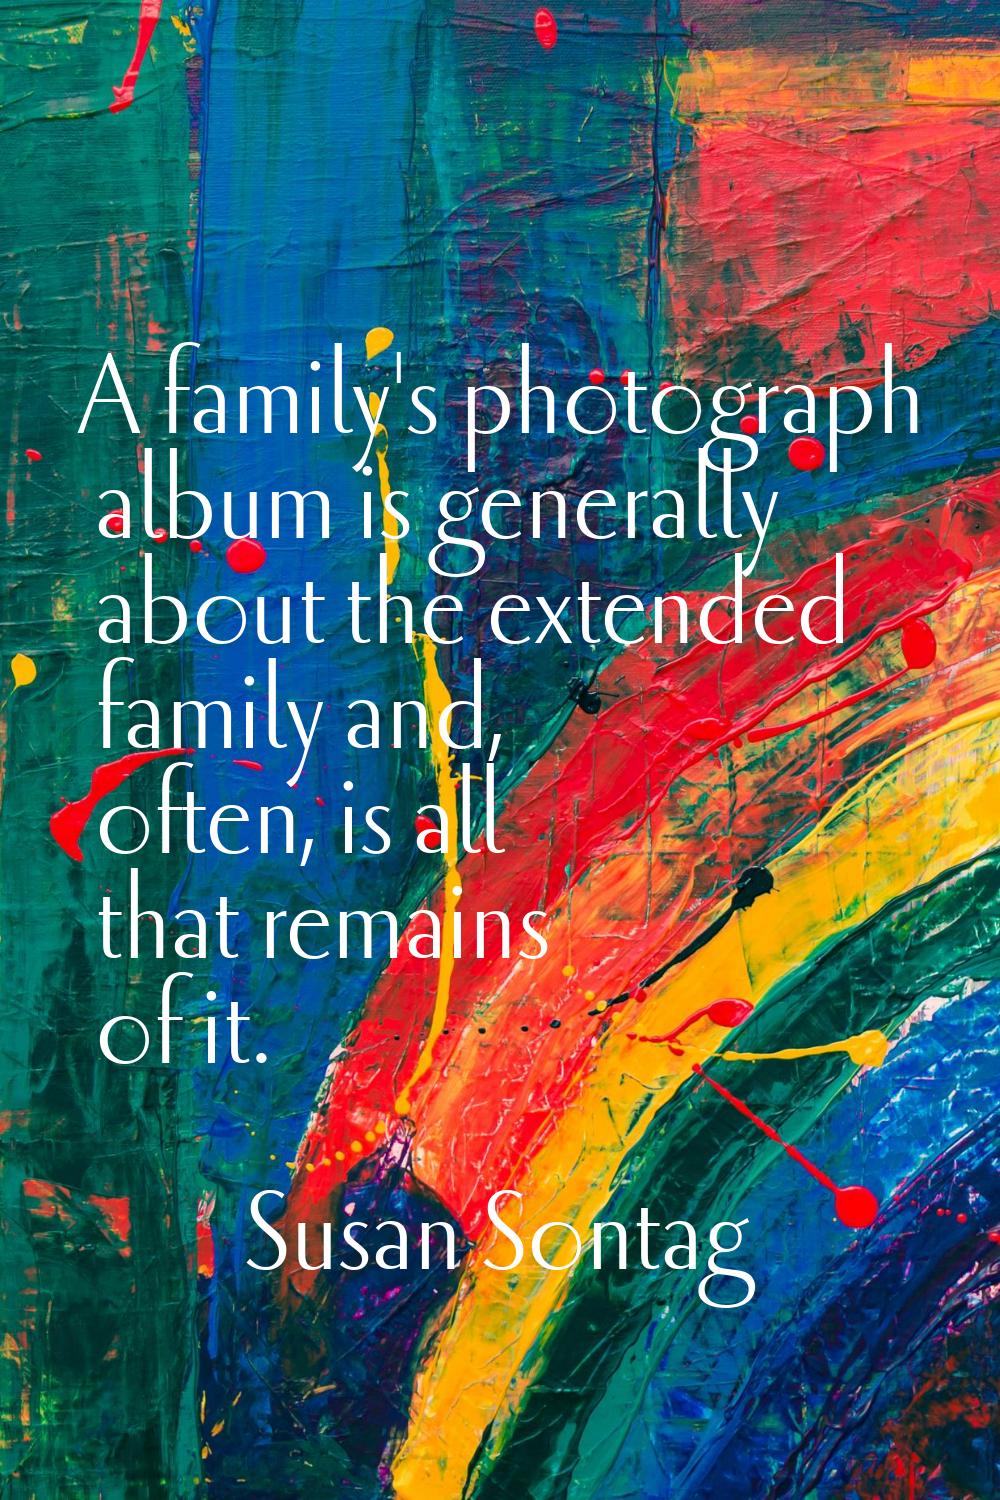 A family's photograph album is generally about the extended family and, often, is all that remains 